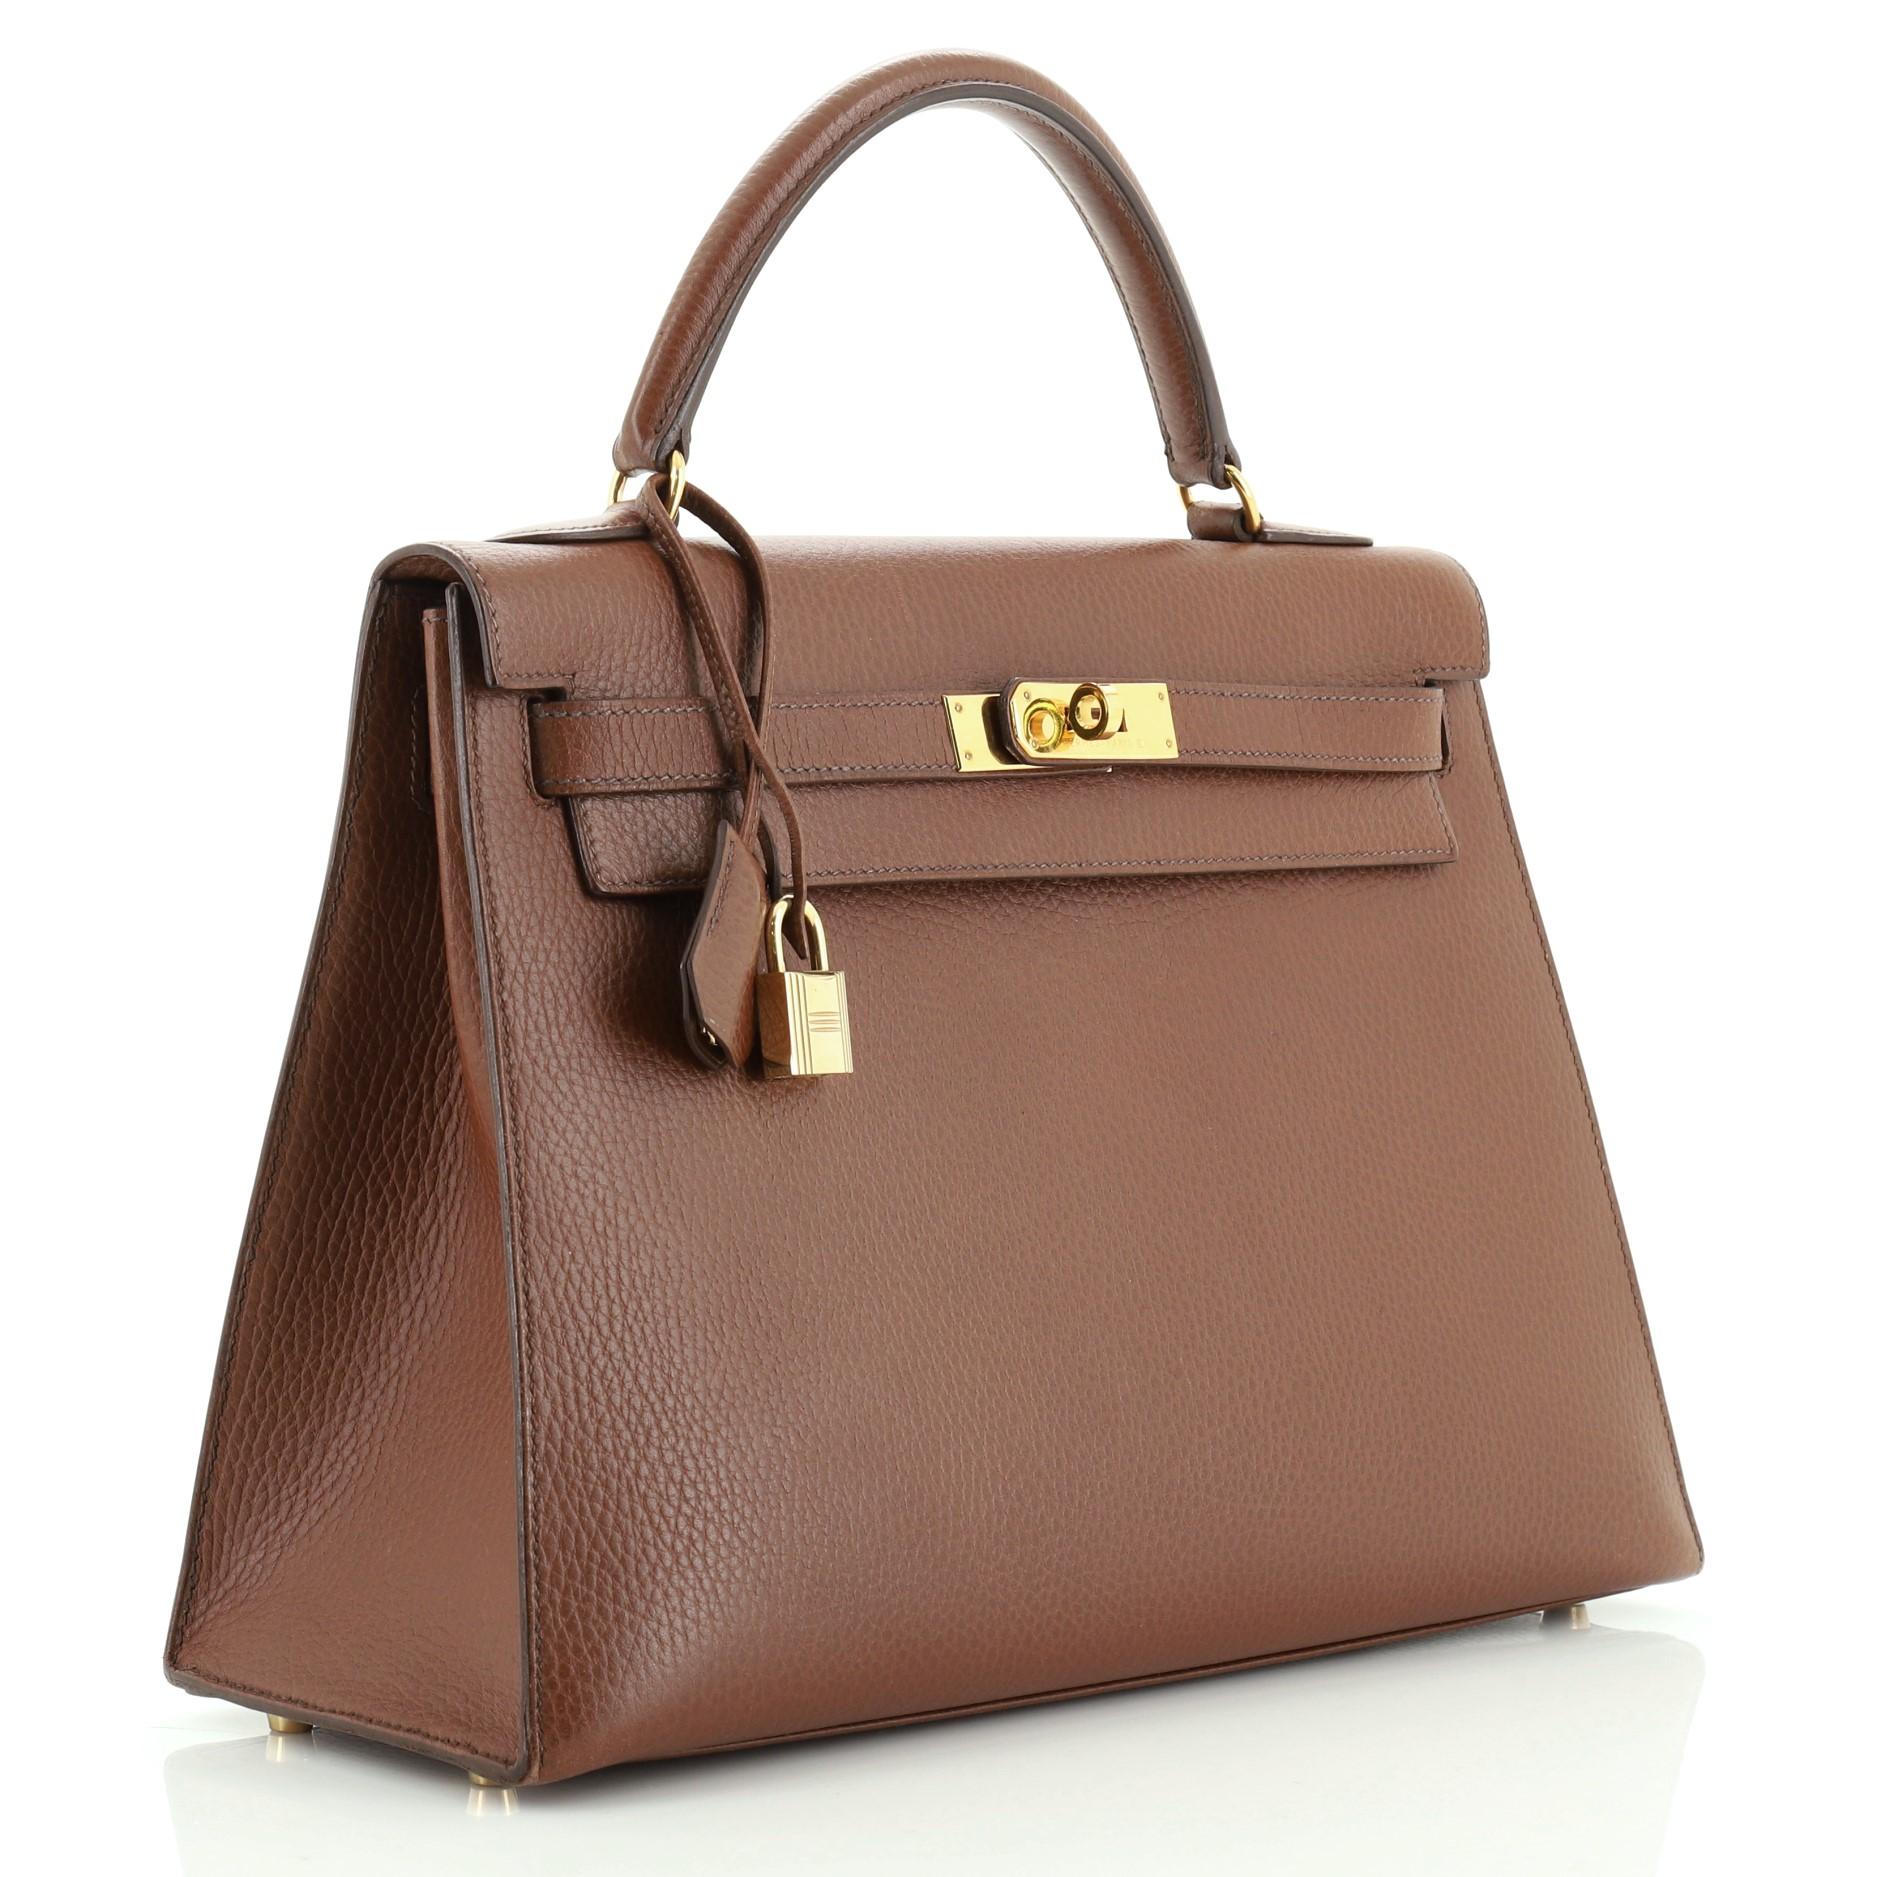 This Hermes Kelly Handbag Noisette Ardennes with Gold Hardware 32, crafted in Noisette brown Ardennes leather, features a single top handle, frontal flap, and gold hardware. Its turn-lock closure opens to a Noisette brown Chevre leather interior